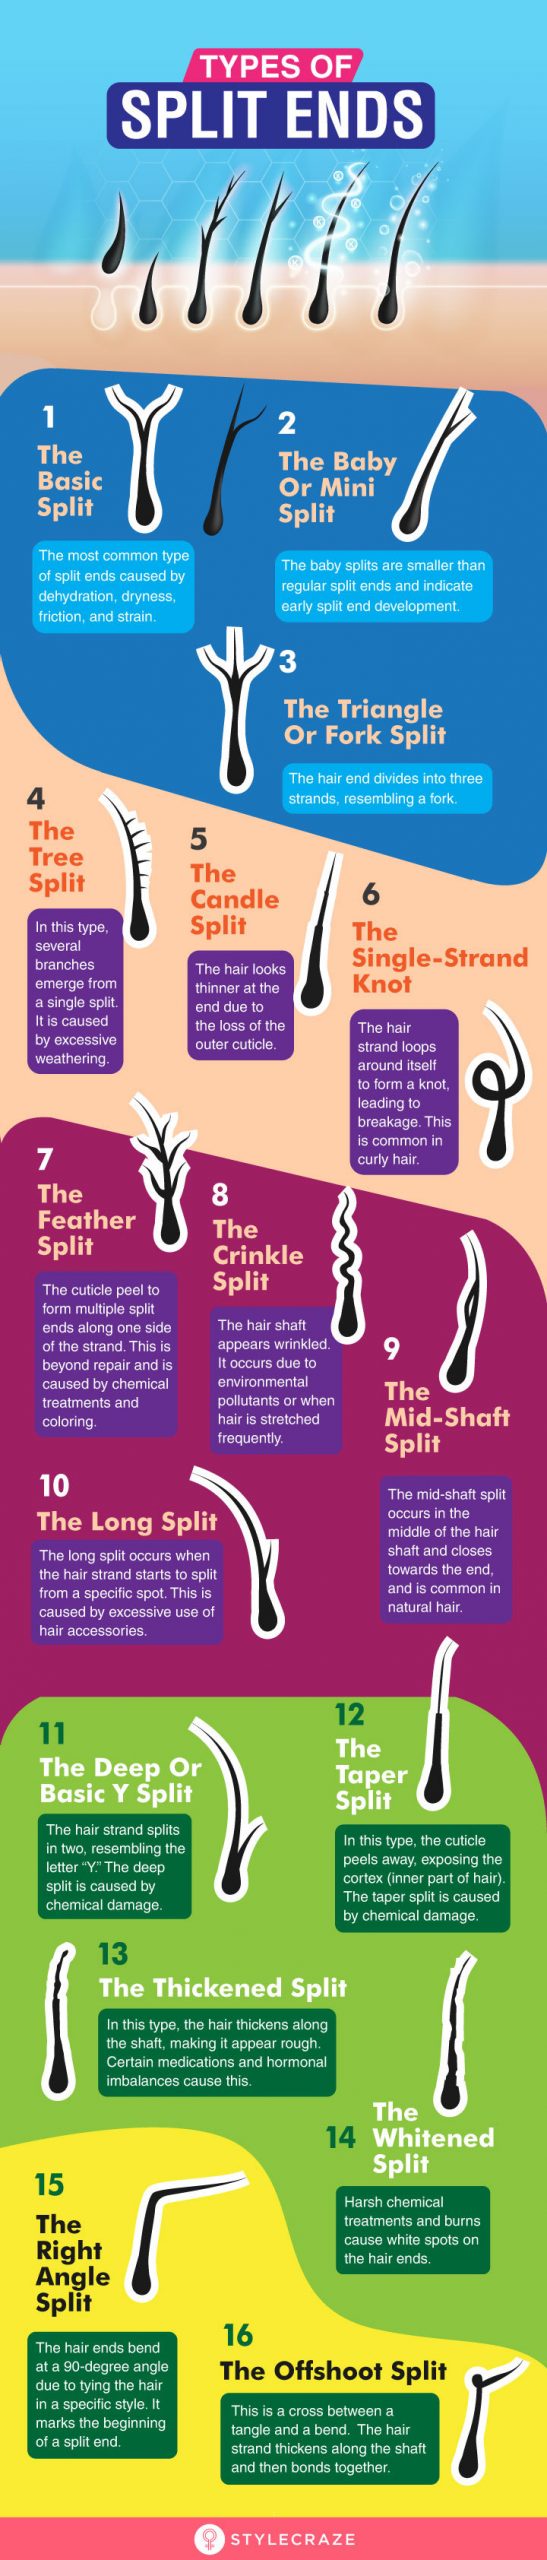 Different types of split ends